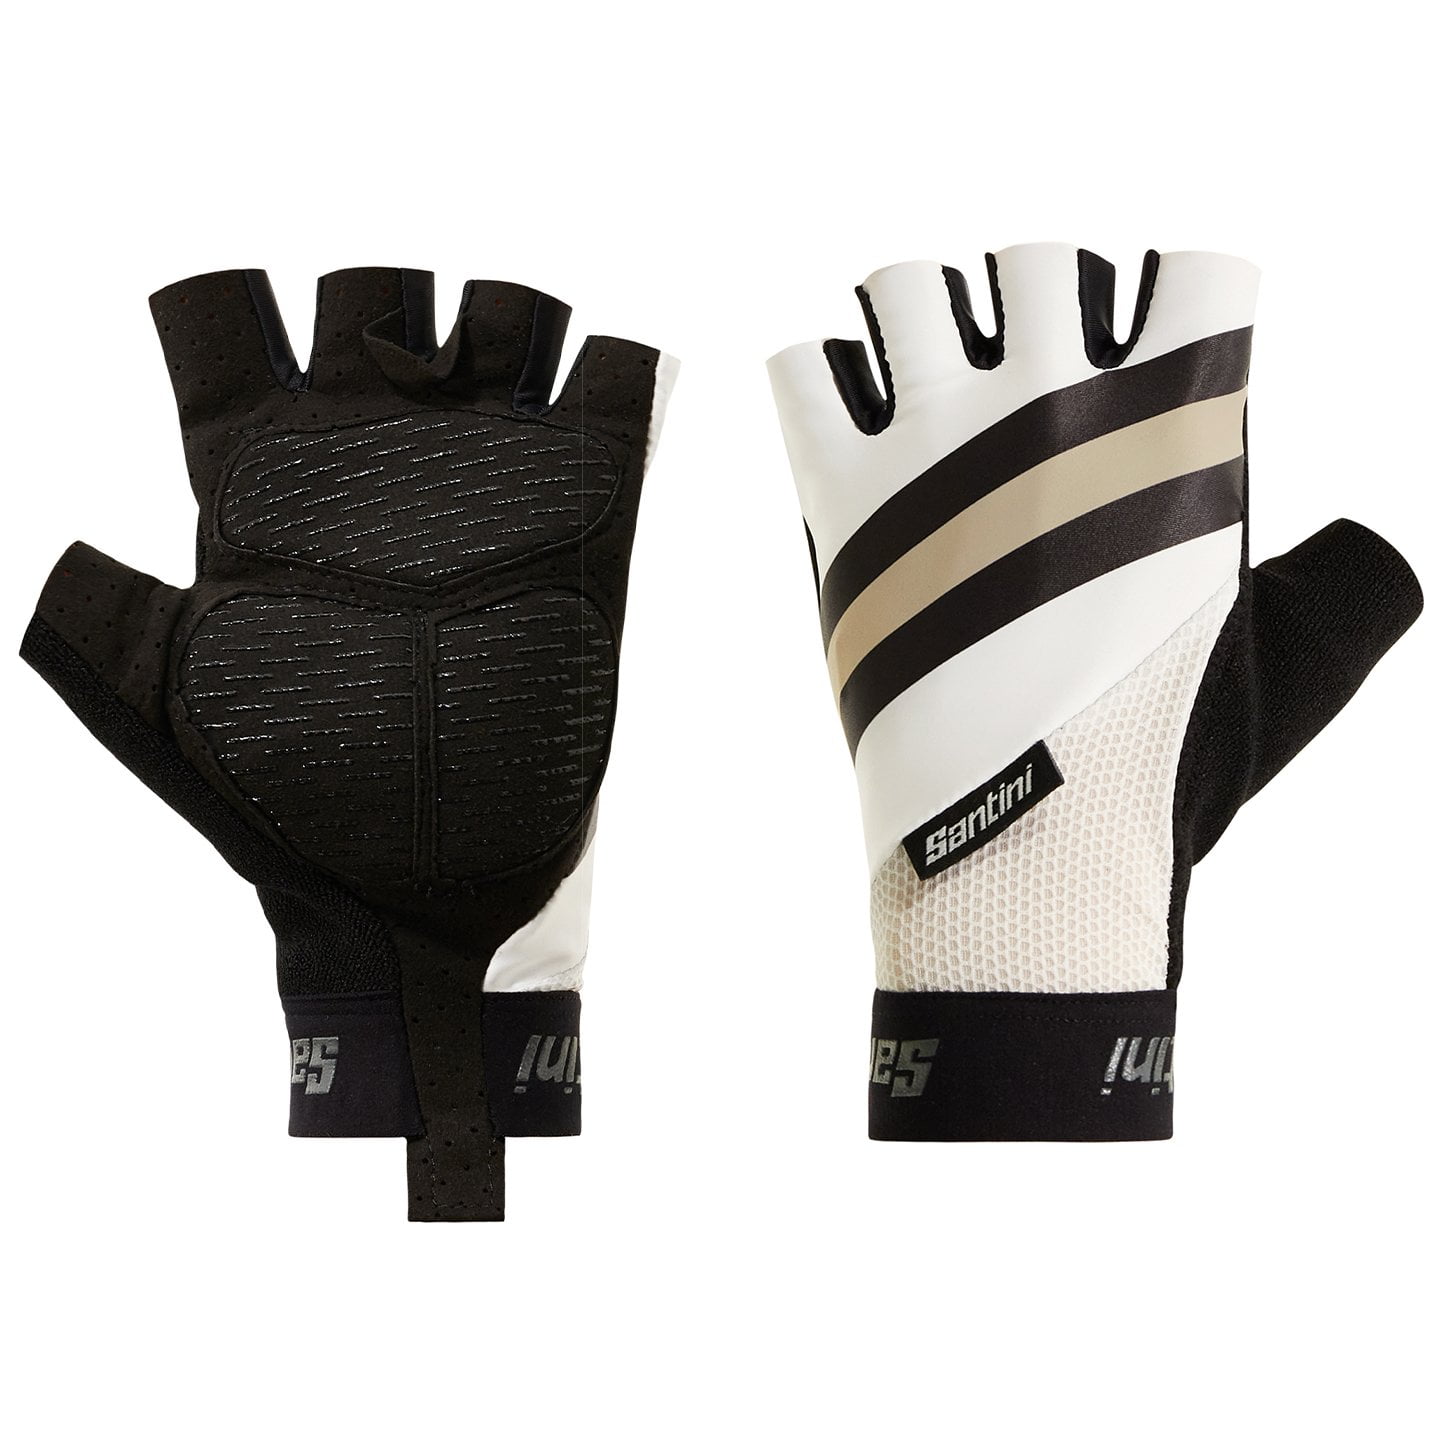 SANTINI Bengal Gloves Cycling Gloves, for men, size S, Cycling gloves, Cycling clothing